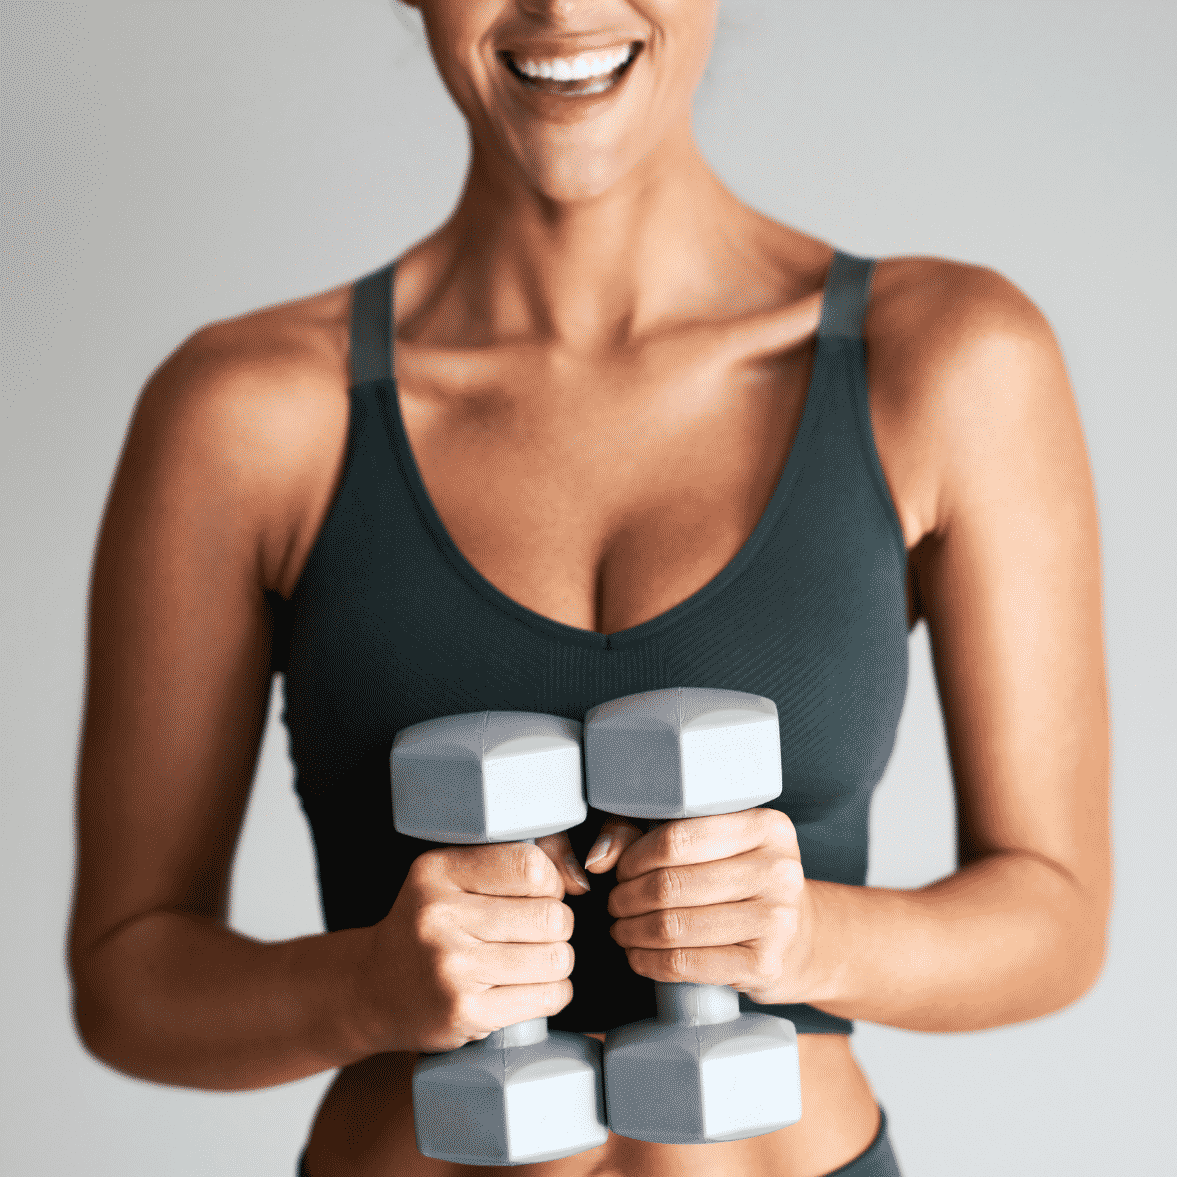 Toned Arm workout For Women Over 50  Start Losing Those Flabby Bat Wing  Arms Today! 